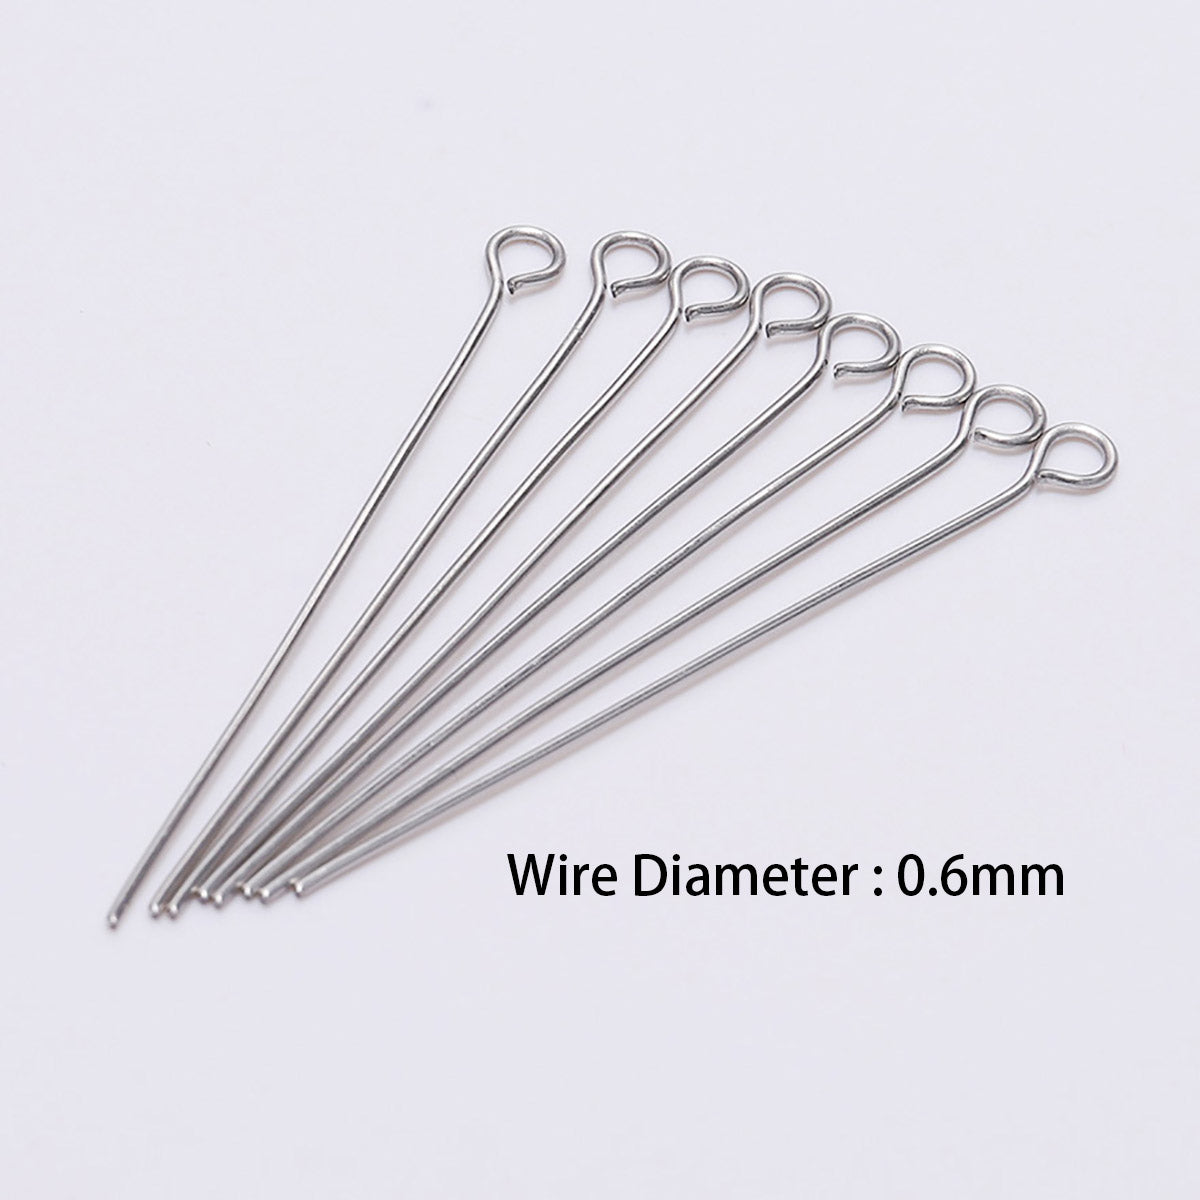 20-50mm Stainless Steel Eye Pins, 100pcs